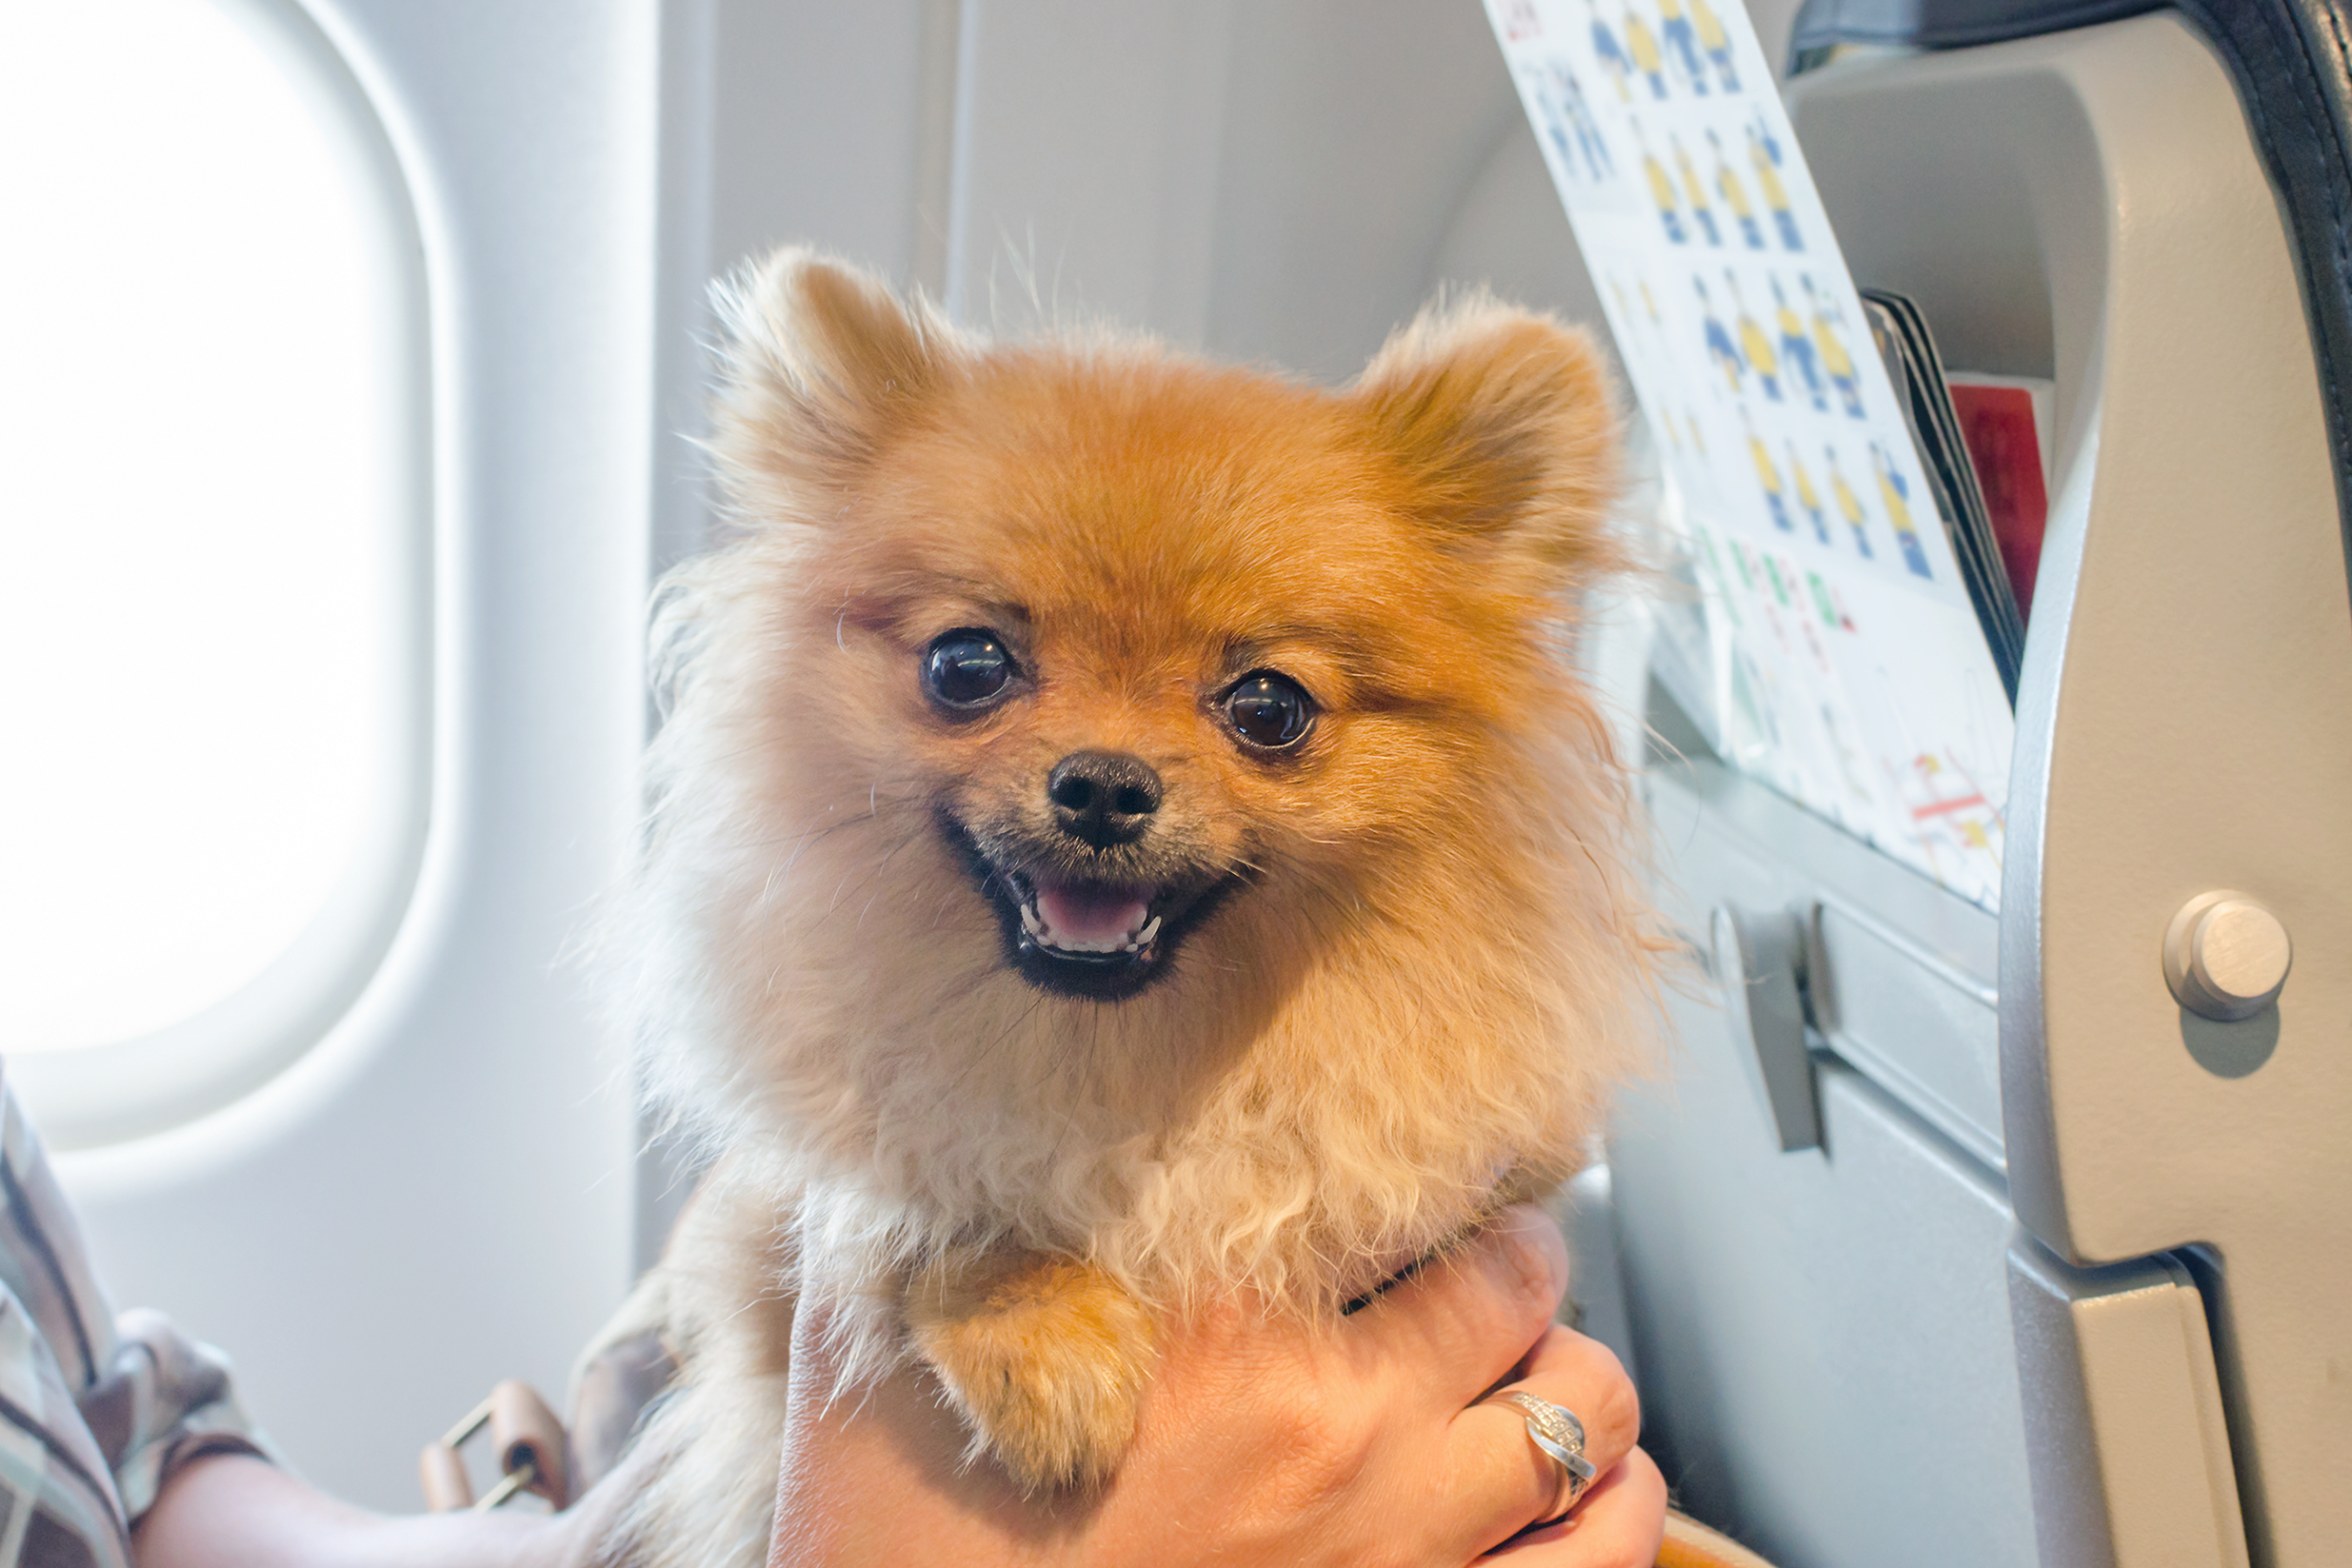 small dog pomaranian in a travel bag on board of plane